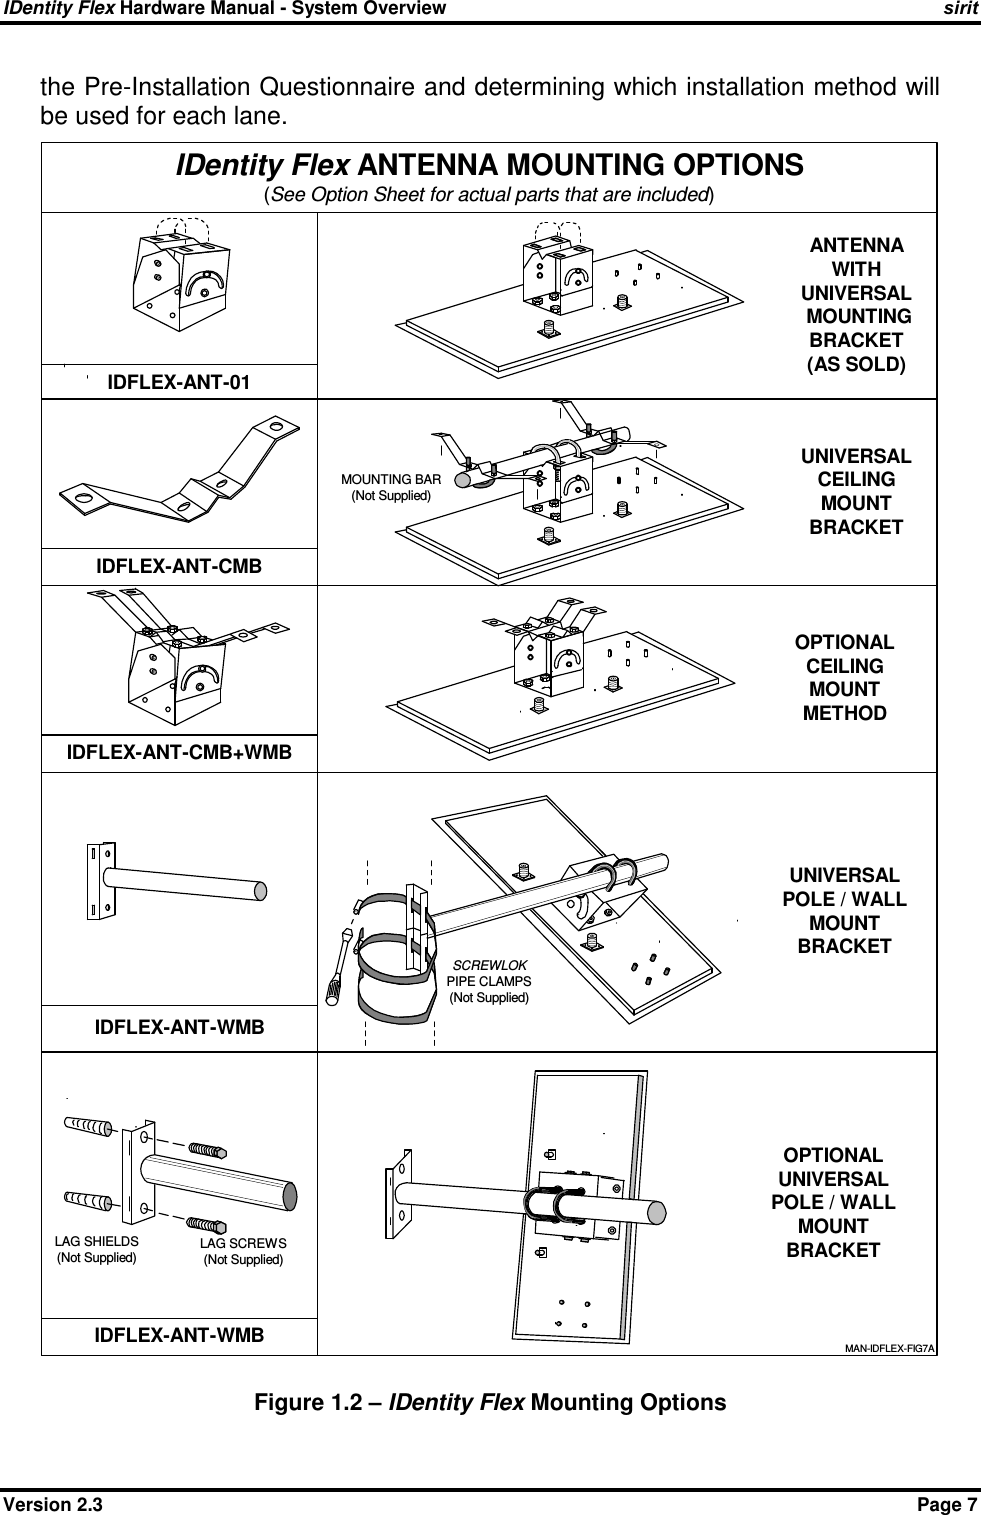 IDentity Flex Hardware Manual - System Overview    sirit Version 2.3    Page 7 the Pre-Installation Questionnaire and determining which installation method will be used for each lane.  Figure 1.2 – IDentity Flex Mounting Options  IDentity Flex ANTENNA MOUNTING OPTIONS(See Option Sheet for actual parts that are included)IDFLEX-ANT-CMBIDFLEX-ANT-01ANTENNAWITHUNIVERSAL MOUNTINGBRACKET(AS SOLD)UNIVERSALCEILINGMOUNTBRACKETIDFLEX-ANT-CMB+WMBUNIVERSALPOLE / WALLMOUNTBRACKETOPTIONALCEILINGMOUNTMETHODIDFLEX-ANT-WMBLAG SCREWS(Not Supplied)LAG SHIELDS(Not Supplied)IDFLEX-ANT-WMBOPTIONALUNIVERSALPOLE / WALLMOUNTBRACKETMAN-IDFLEX-FIG7ASCREWLOKPIPE CLAMPS(Not Supplied)MOUNTING BAR(Not Supplied)